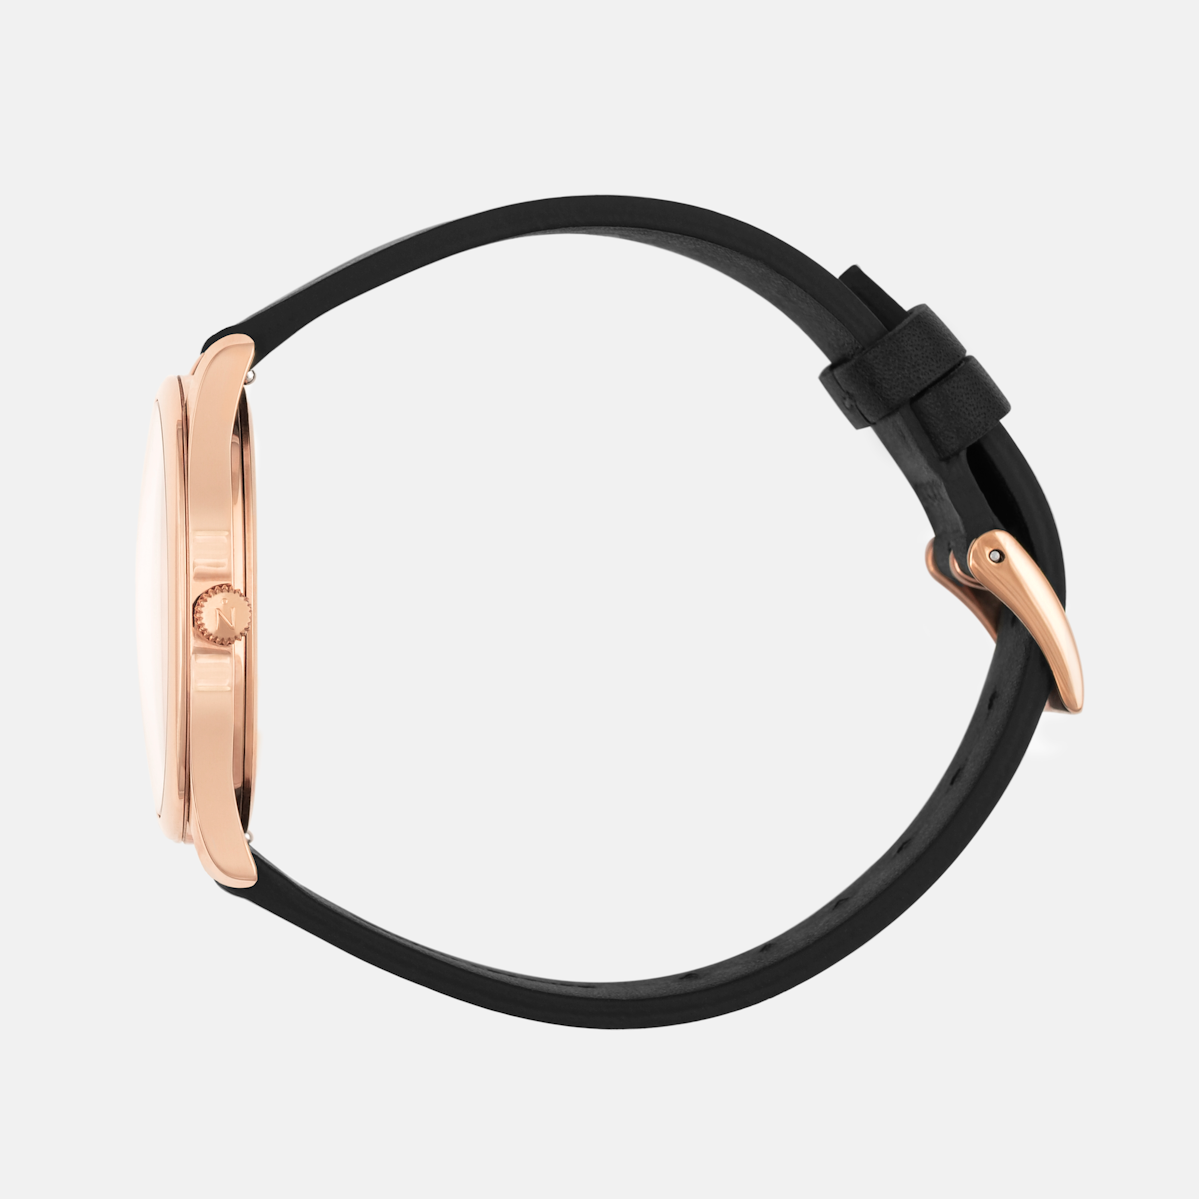 Lune 8 - Rose Gold and White - Natural Leather